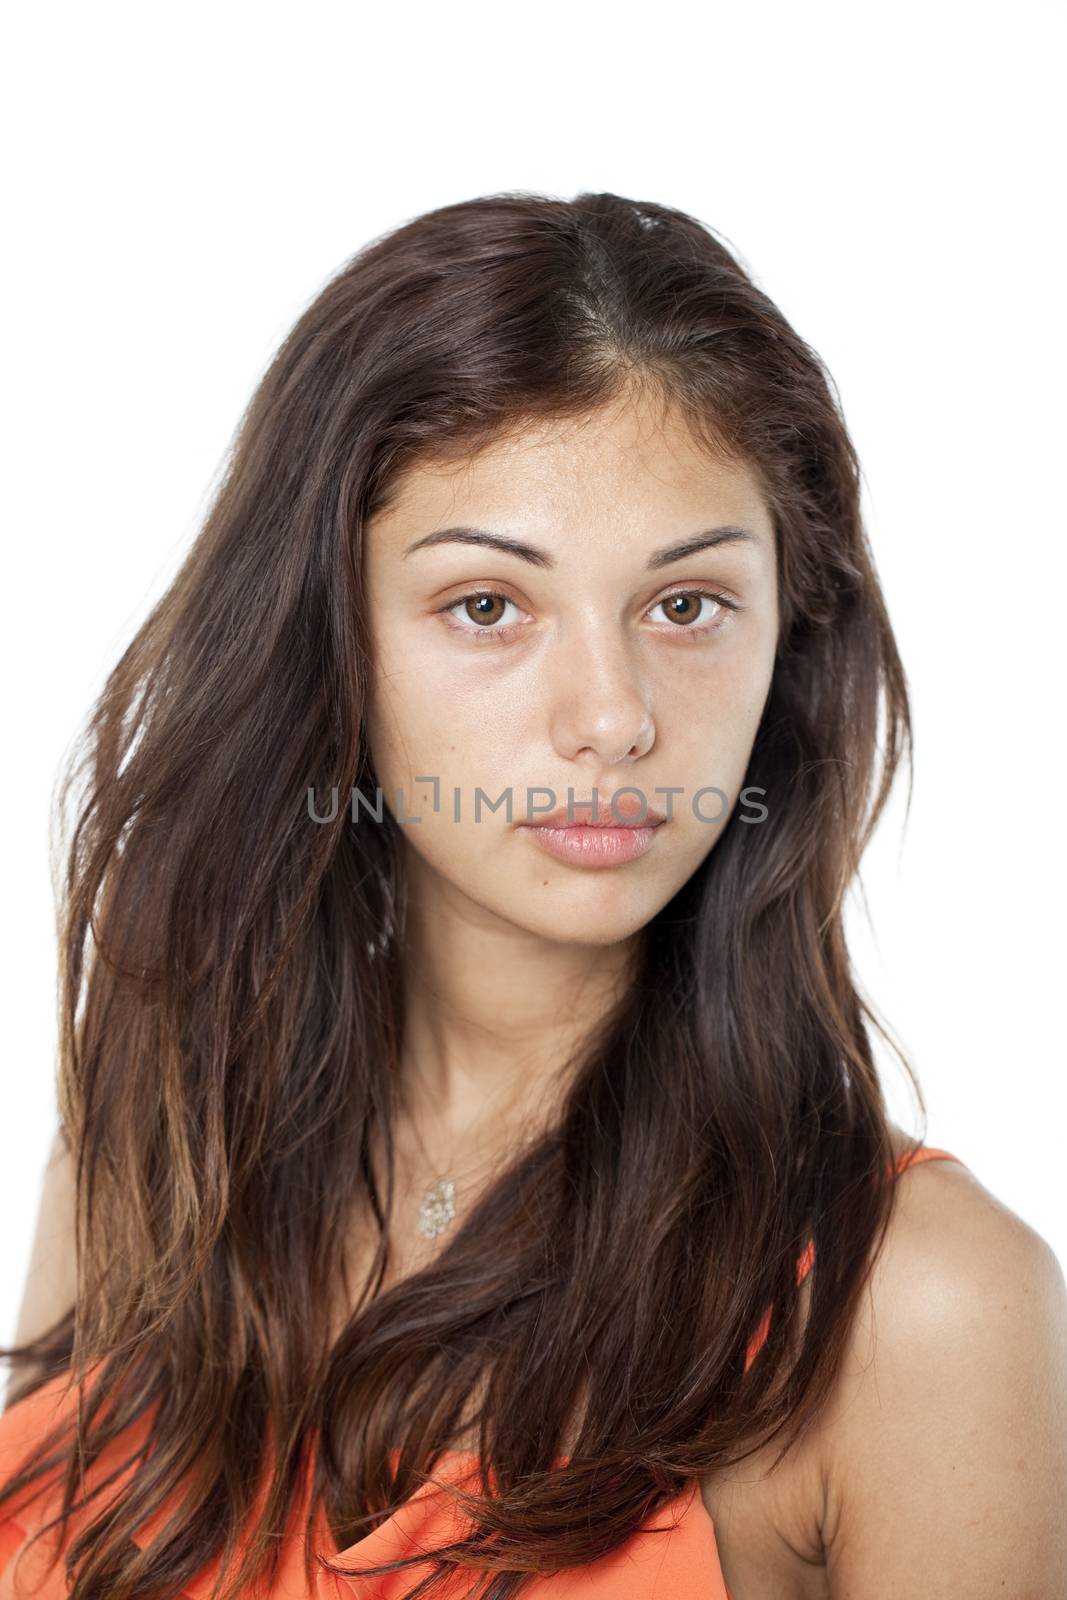 Portrait of a brunette without makeup isolated on white